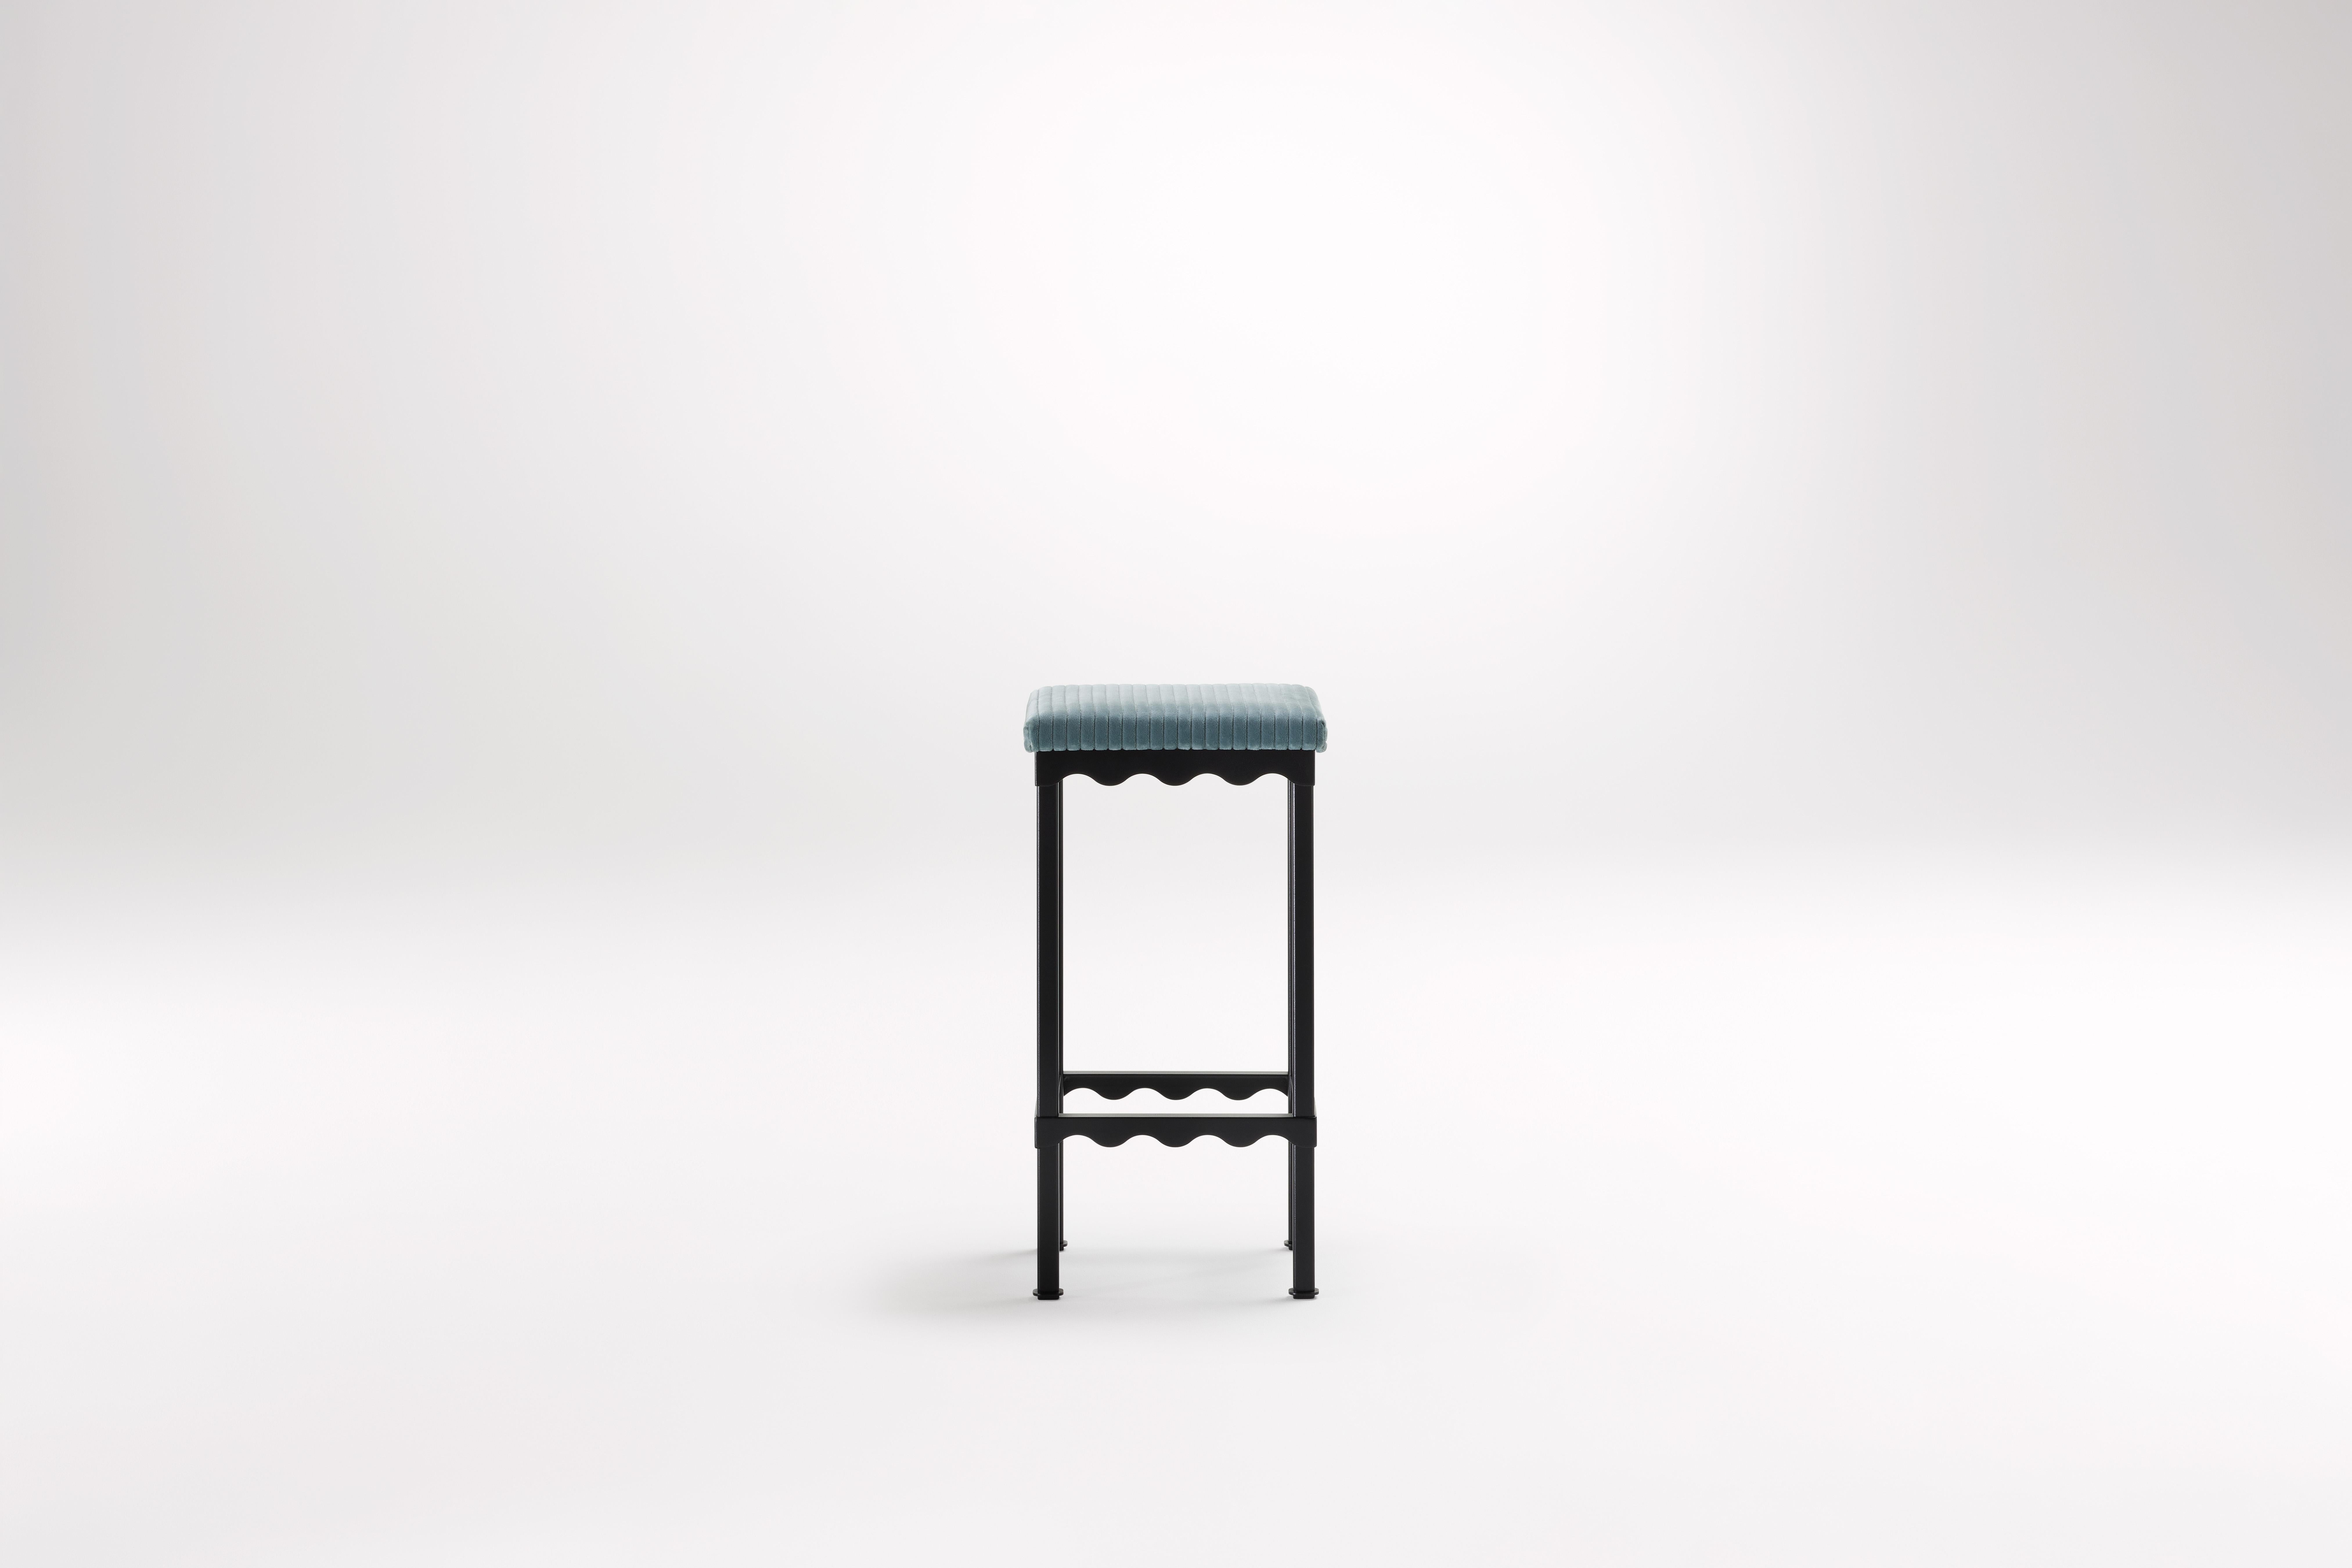 Oracle Bellini High Stool by Coco Flip
Dimensions: D 34 x W 34 x H 65/75 cm
Materials: Timber / Stone tops, Powder-coated steel frame. 
Weight: 8kg
Frame Finishes: Textura Black.

Coco Flip is a Melbourne based furniture and lighting design studio,